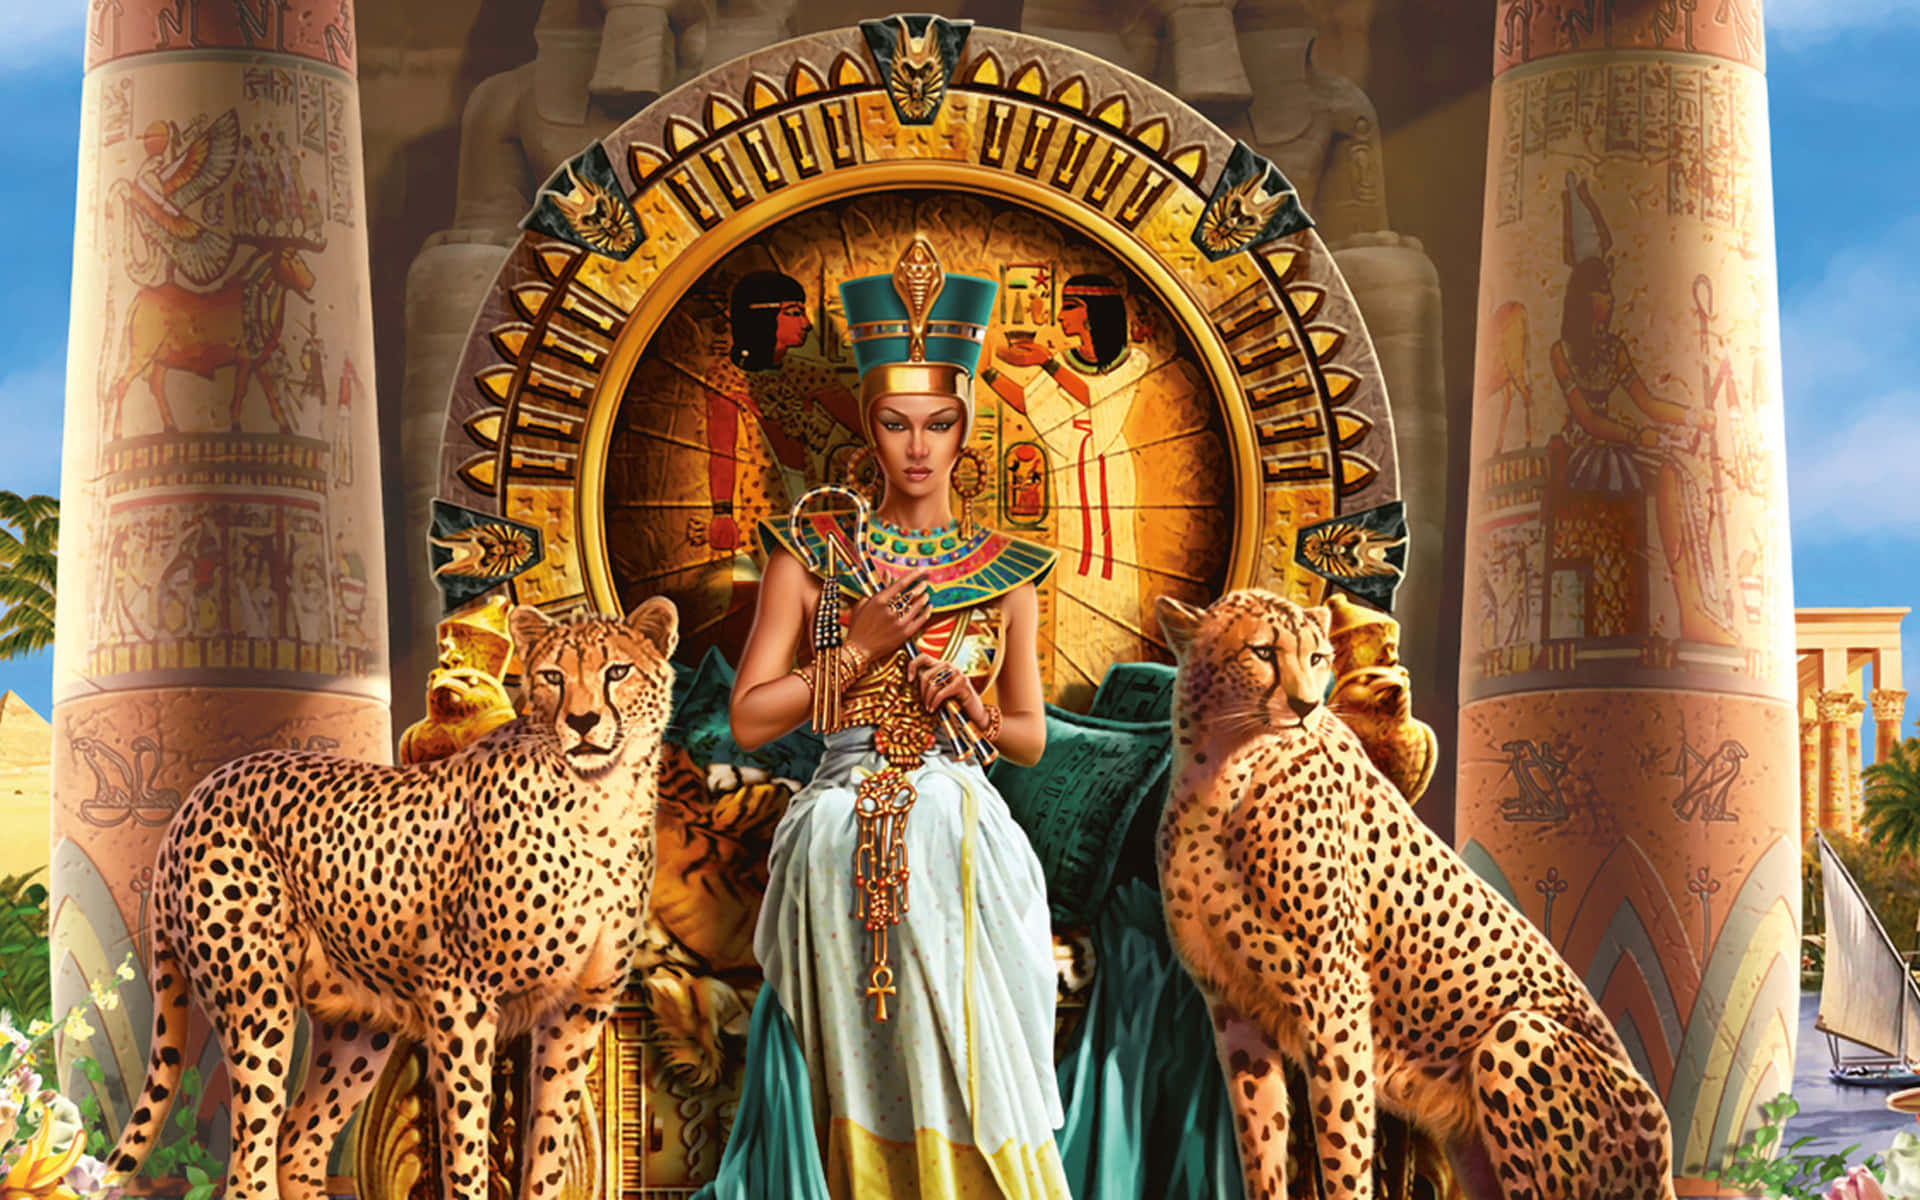 Ancient queen of Egypt, Cleopatra